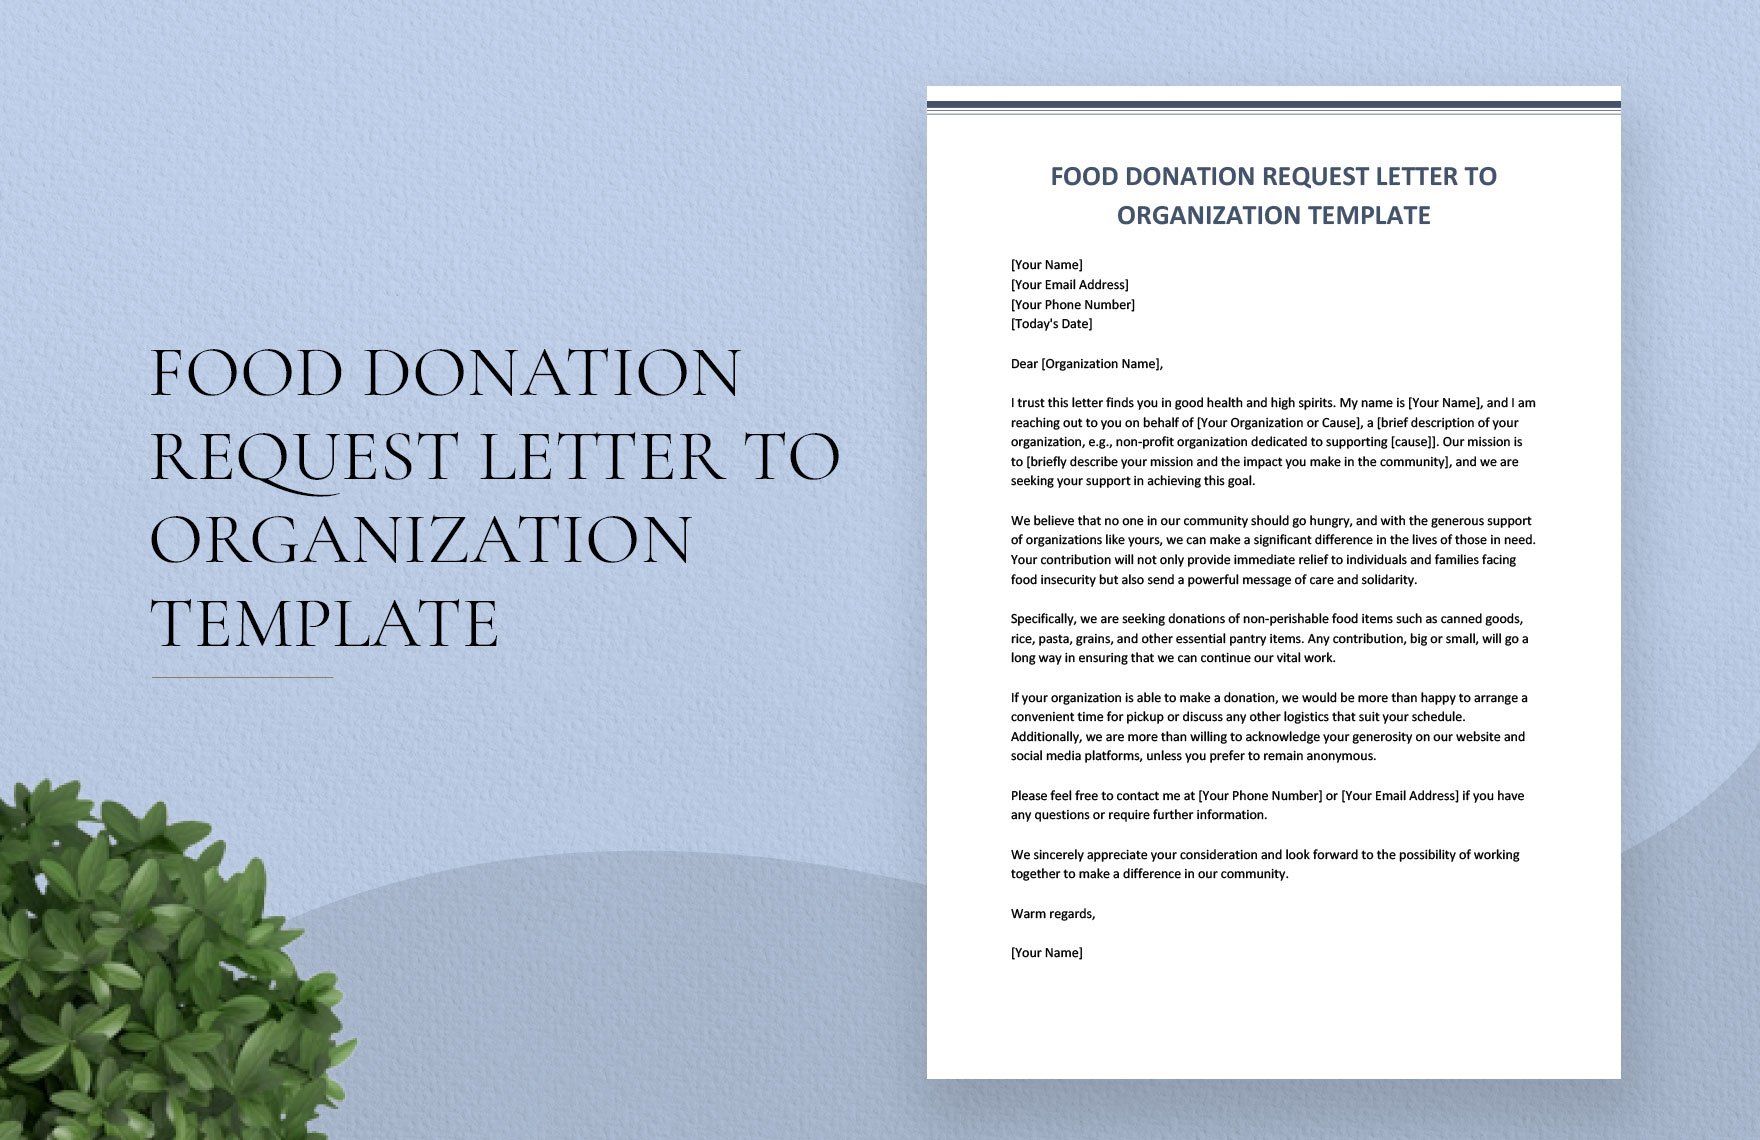 Food Donation Request Letter to Organization Template